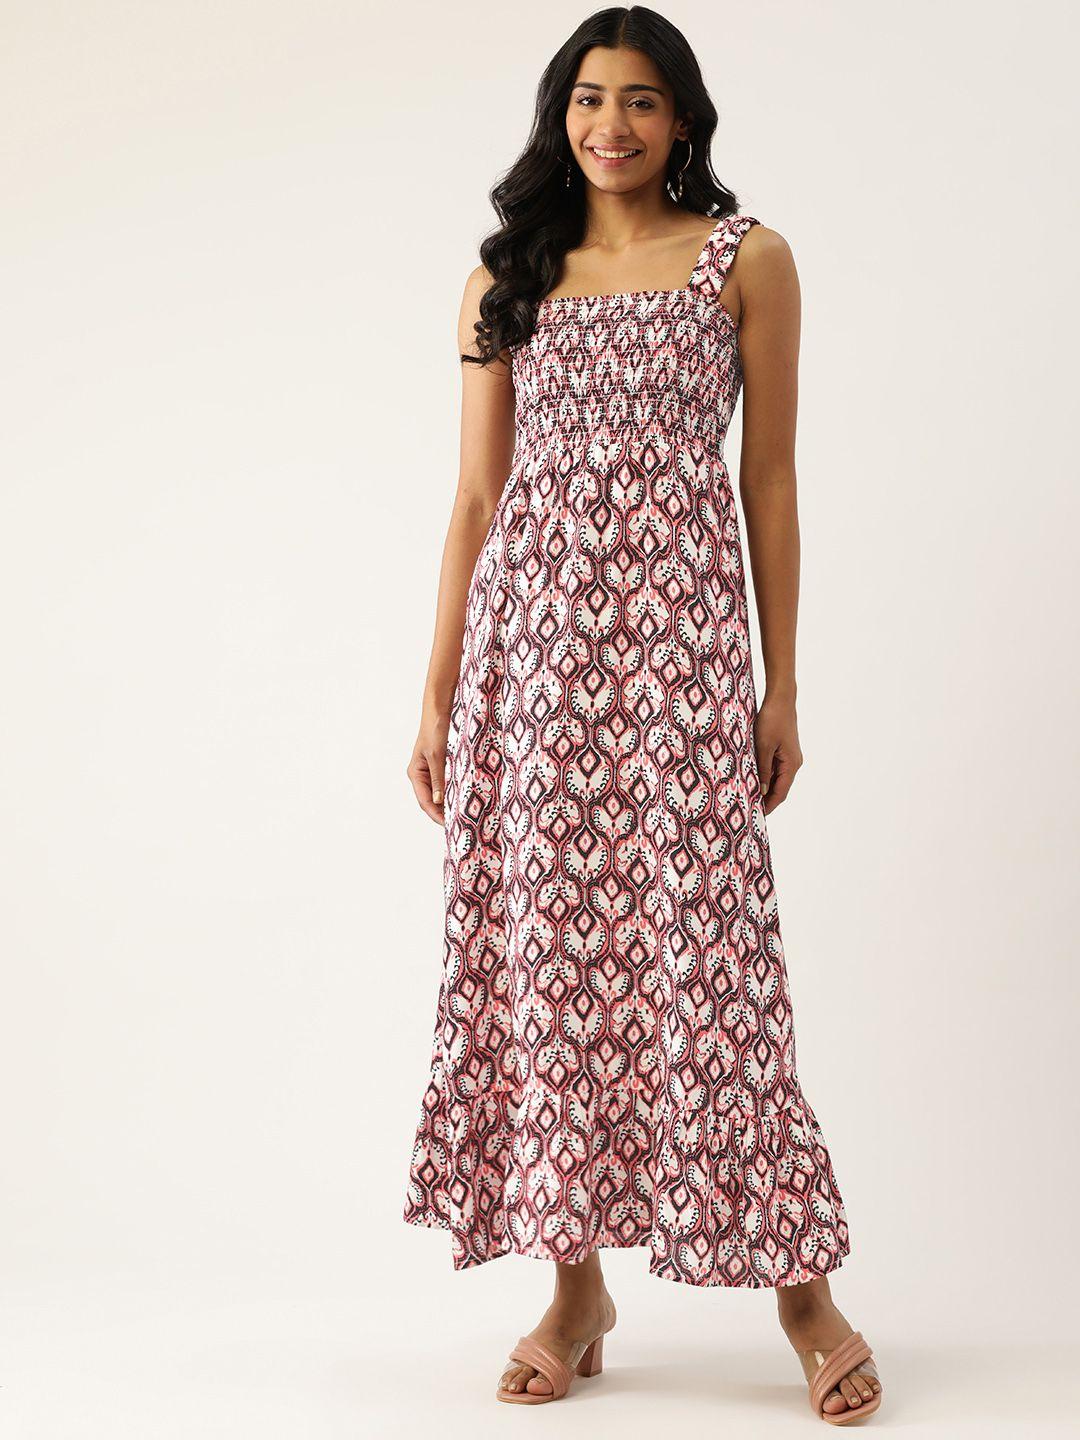 rue-collection-white-&-black-printed-maxi-dress